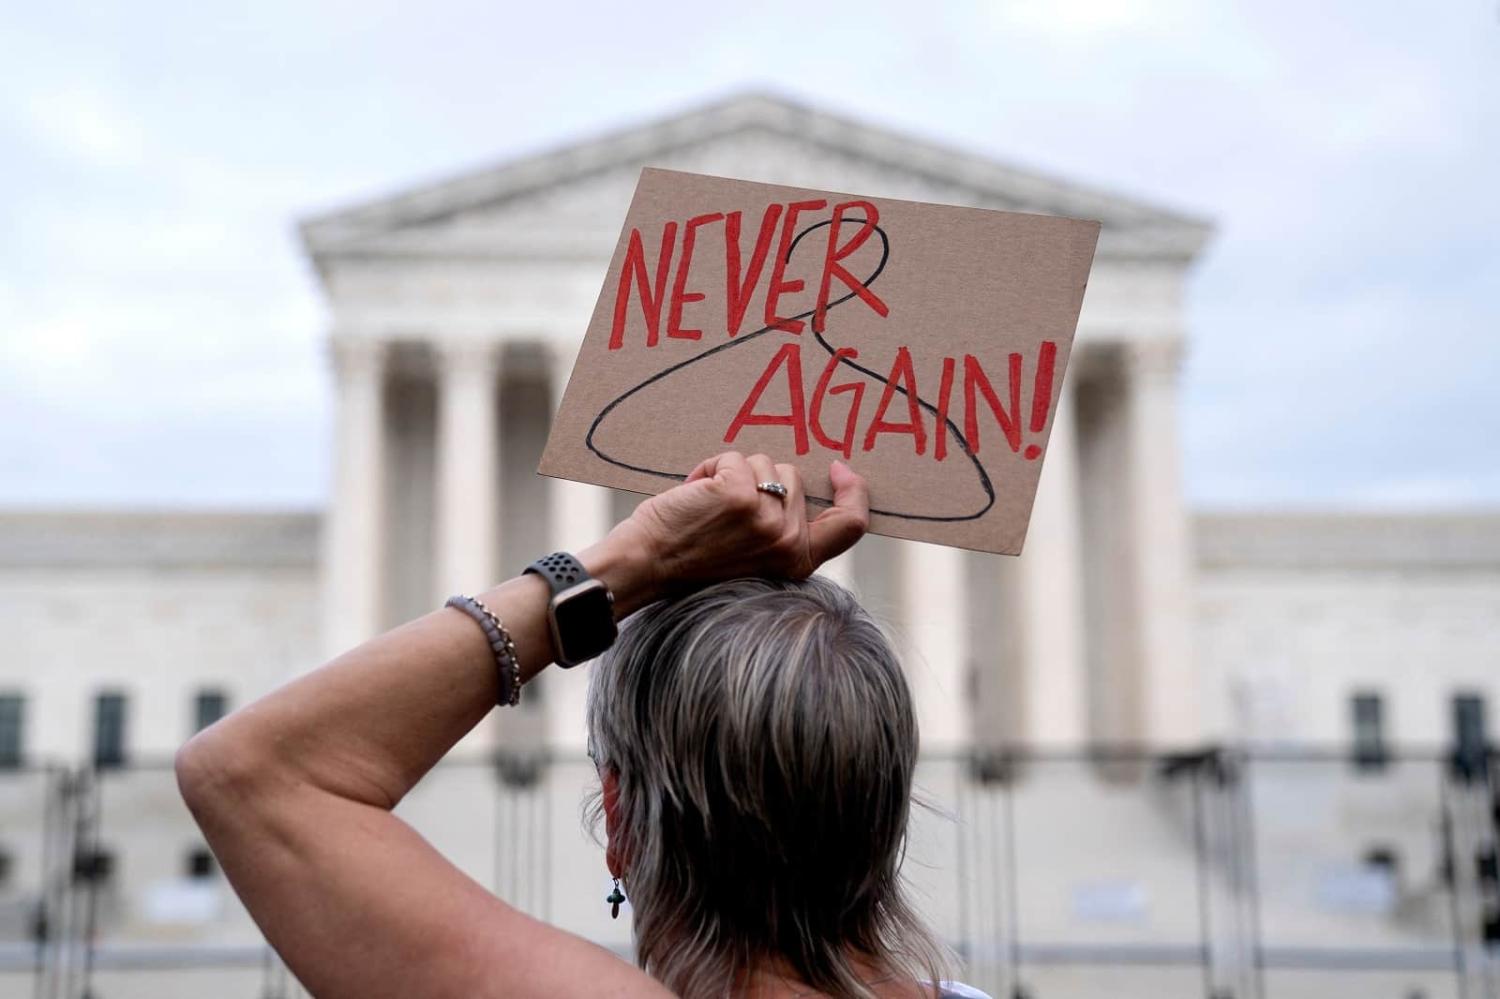 A pro-choice demonstrator outside the US Supreme Court in Washington, DC, on 11 May 2022 (Stefani Reynolds/AFP via Getty Images)